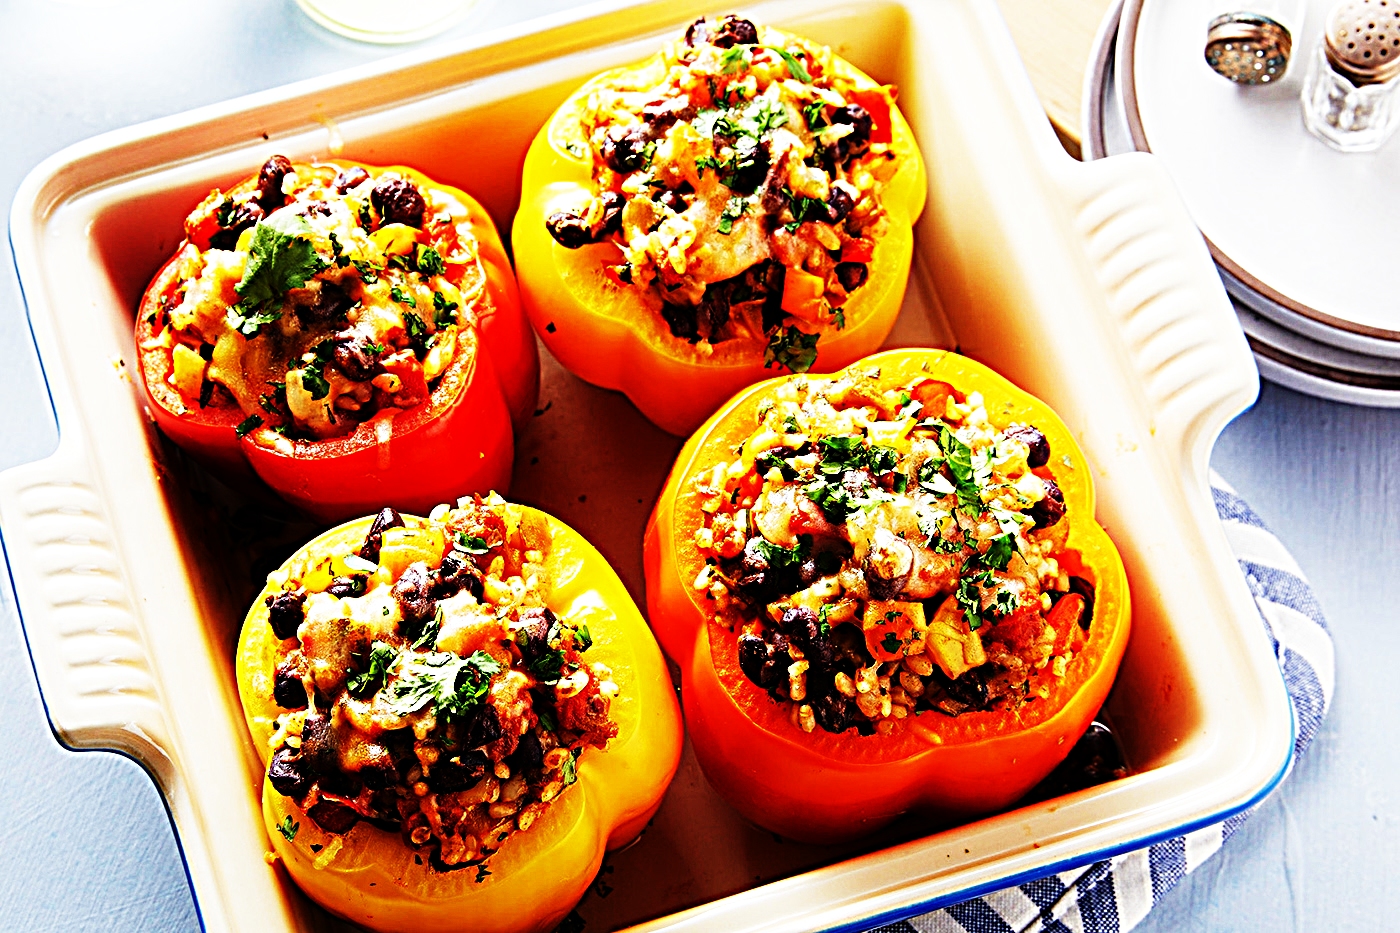 Stupid-Easy Recipe for Mexican Black Bean & Cheese Stuffed Peppers (#1 Top-Rated)